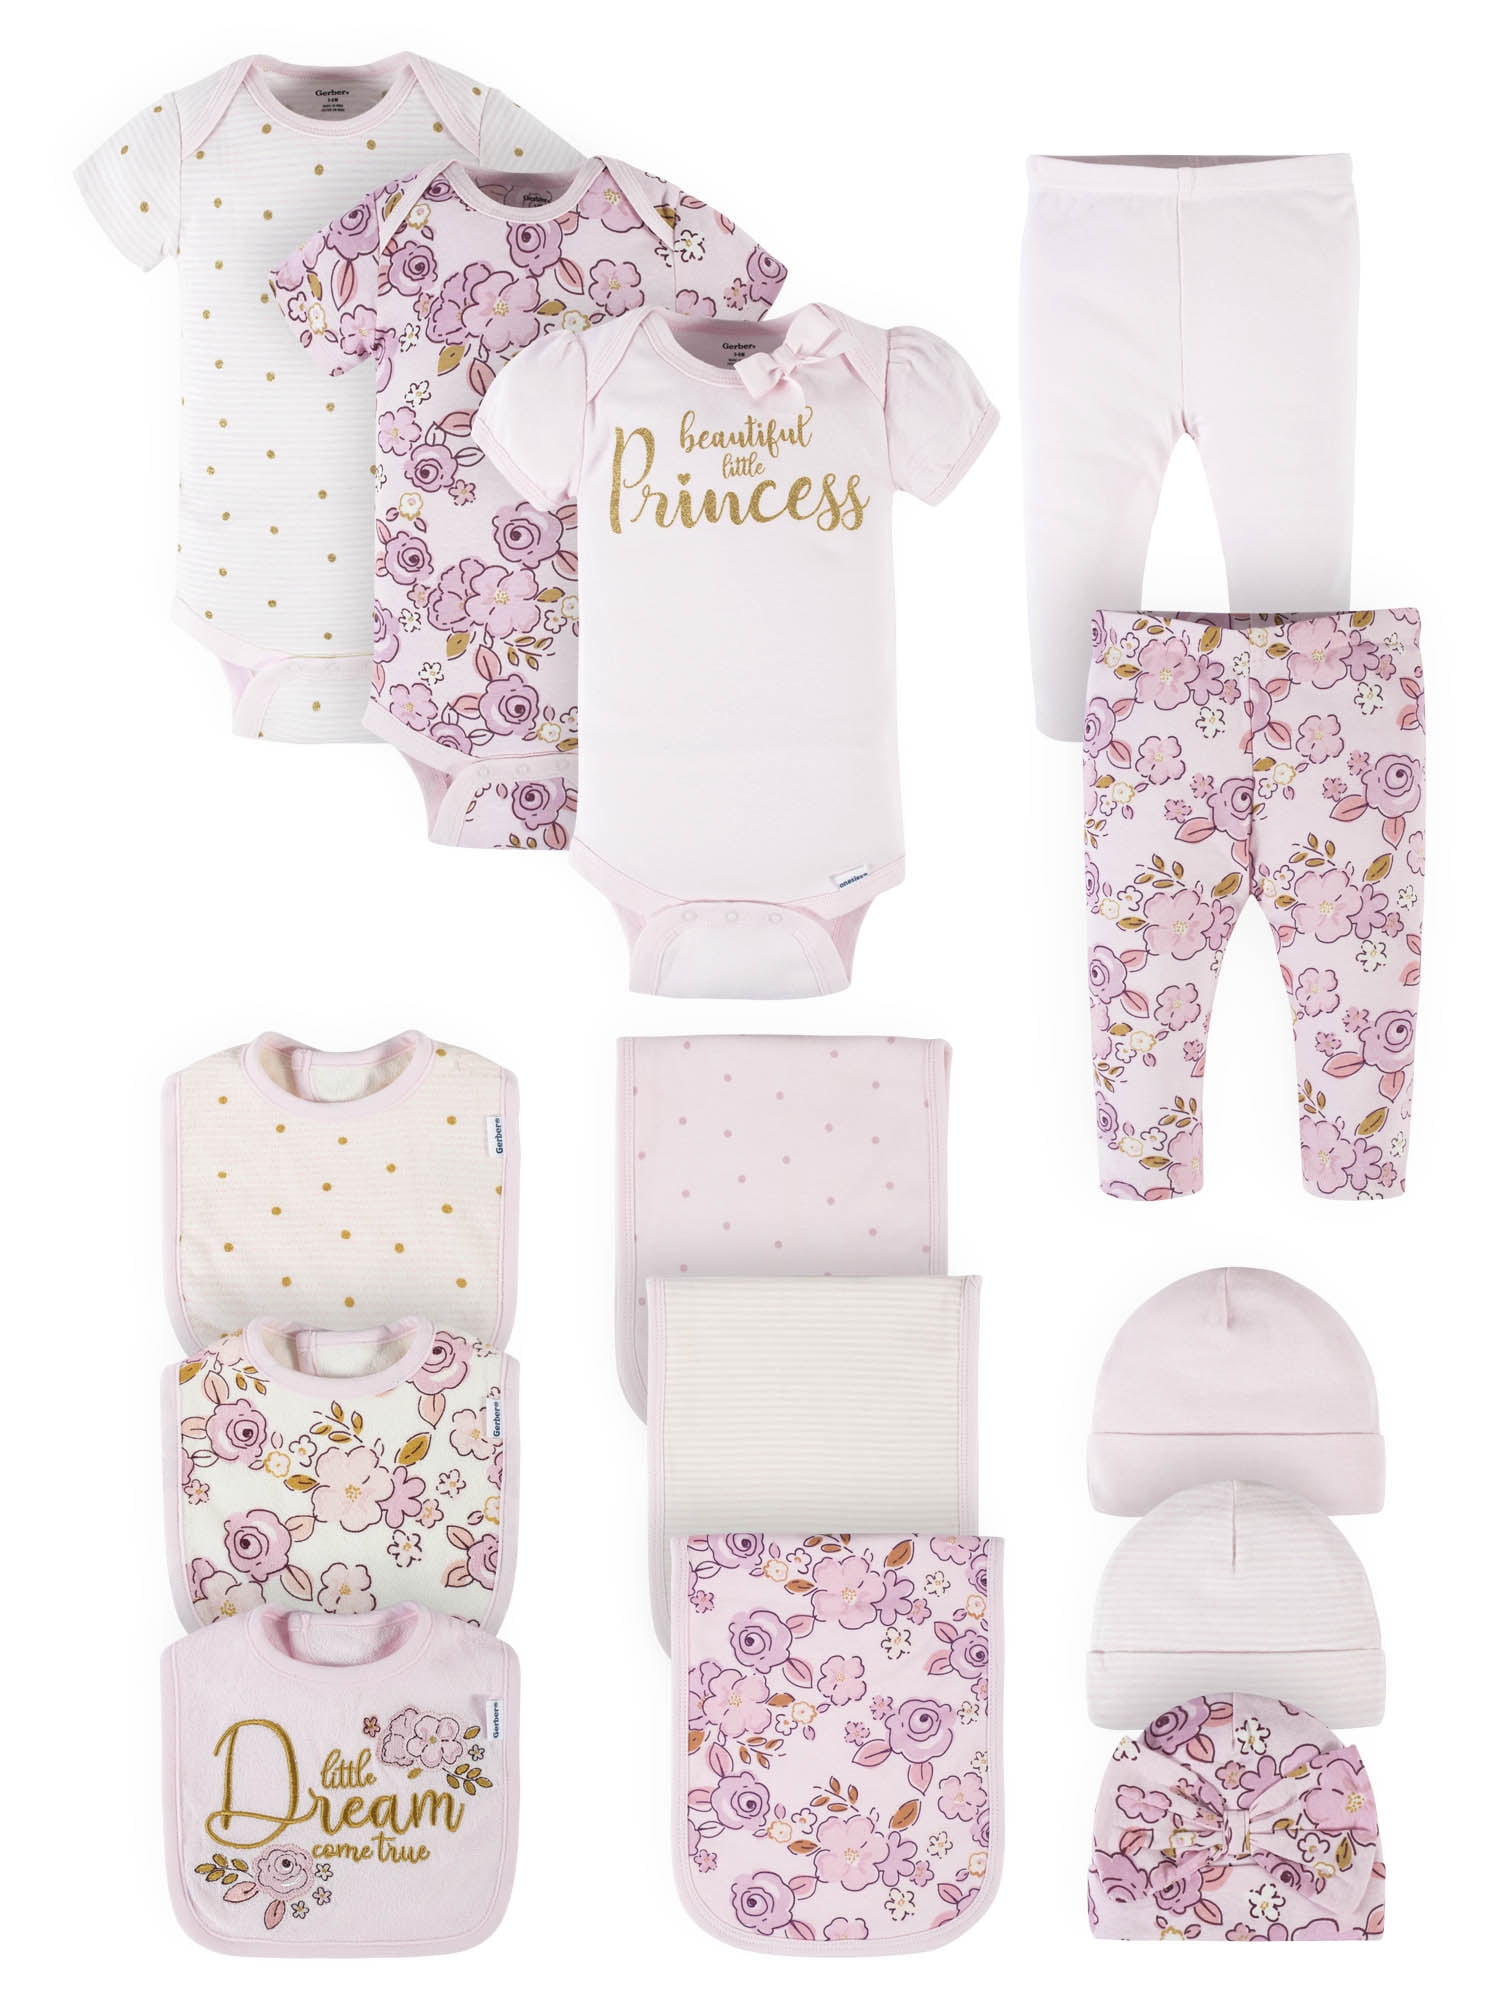 IV. Essential Clothing Items for 3-6 Months Old Babies